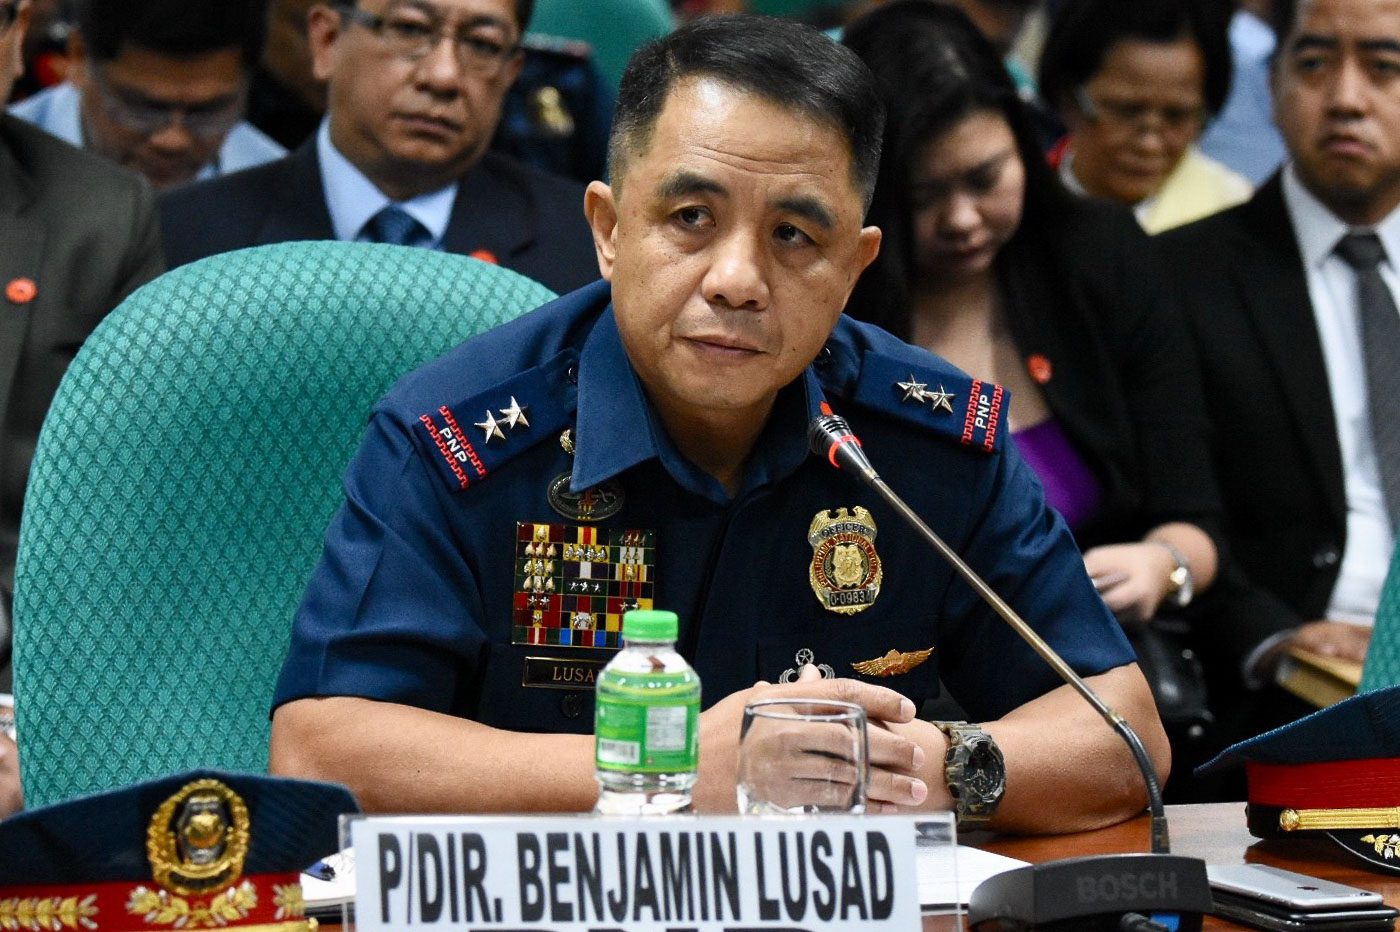 WHY REDIRECT FUNDS? Police Director Benjamin Lusad during the senate hearing on SAF funds on May 22, 2018. Photo by Angie de Silva/Rappler 